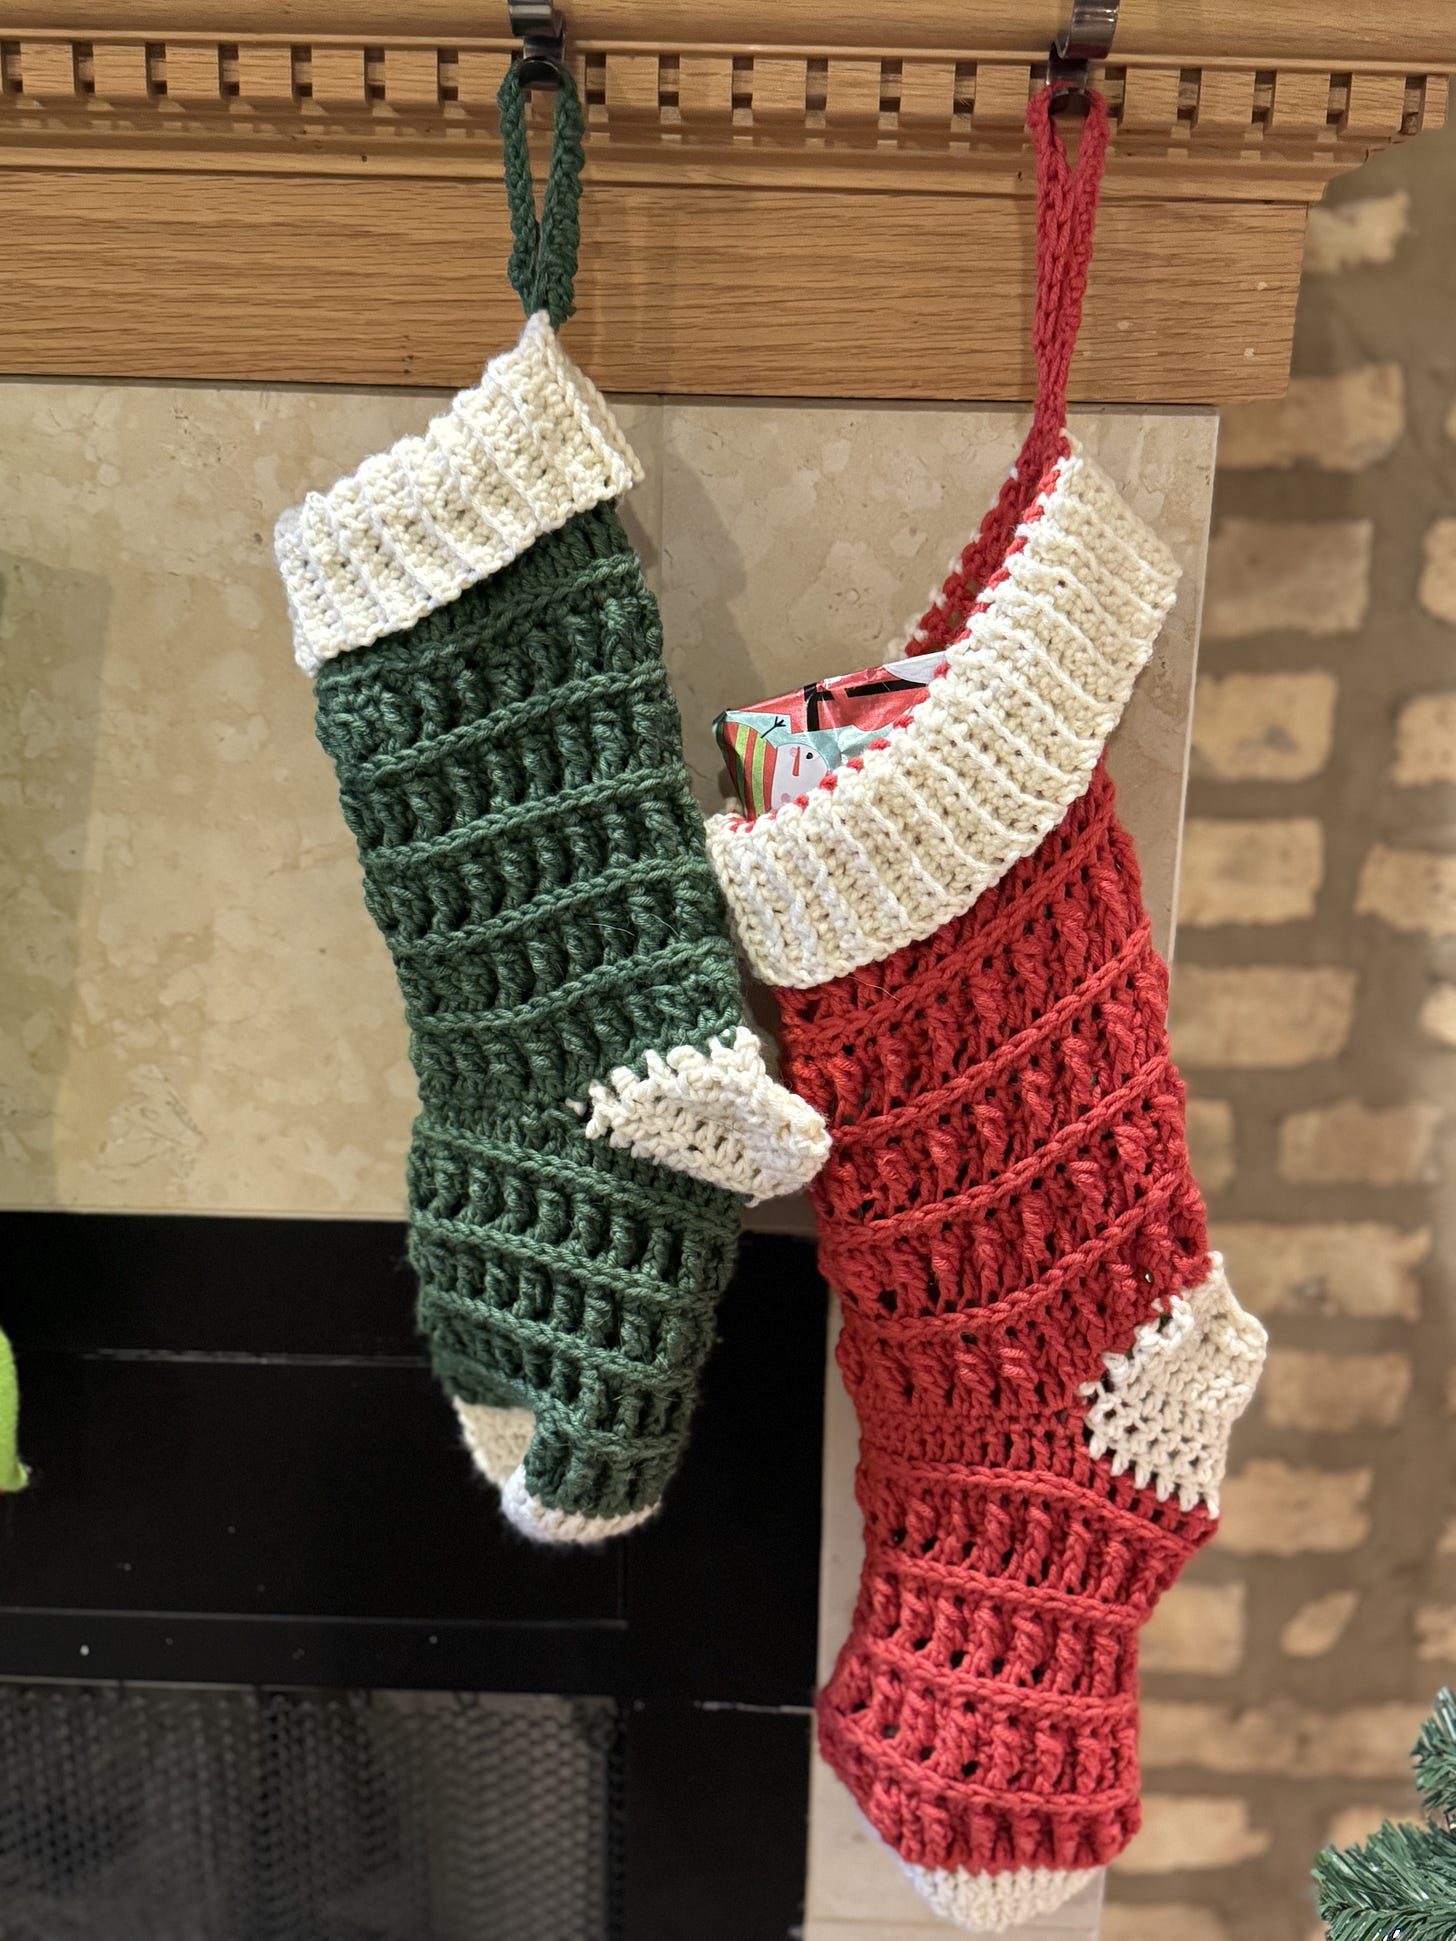 Two crocheted Christmas stockings, one green, one red.